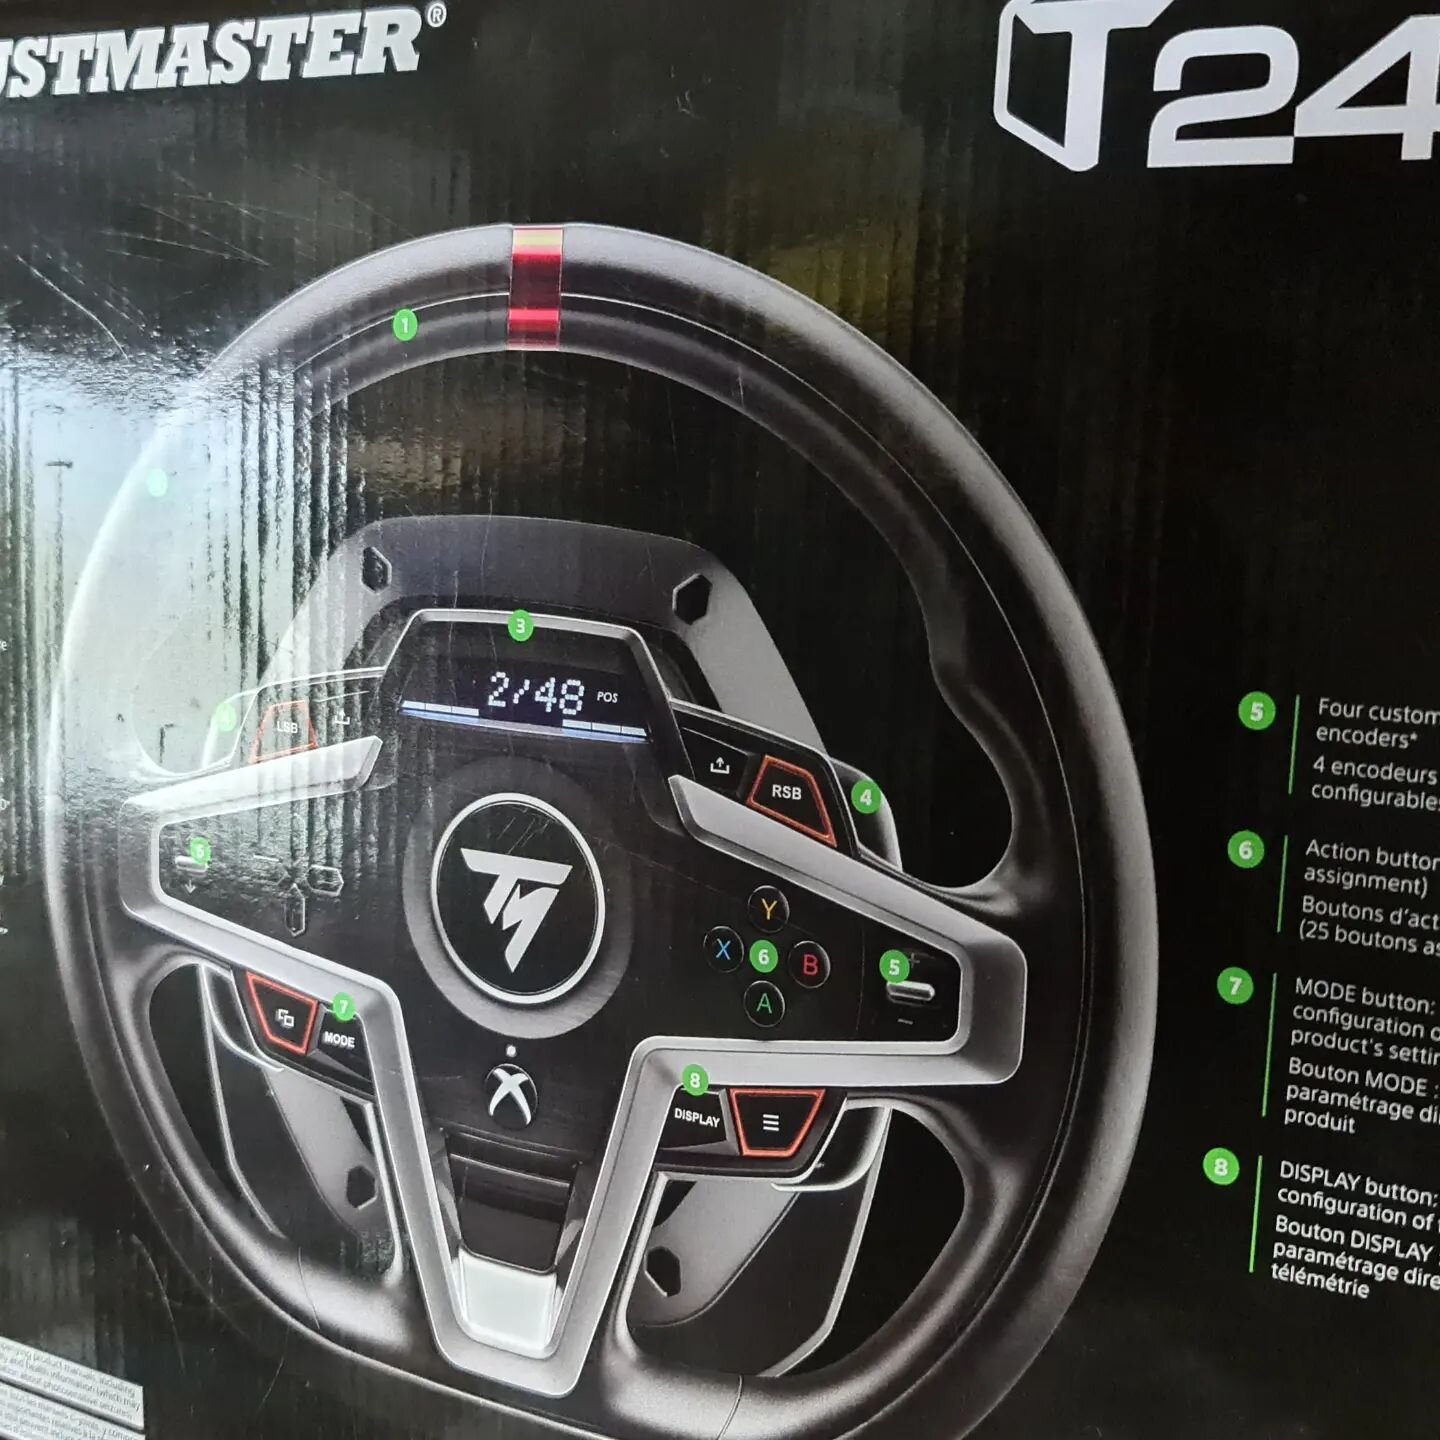 Black Friday Deals! Thrustmaster T248 Xbox One racing wheel only &pound;199.99 save &pound;50